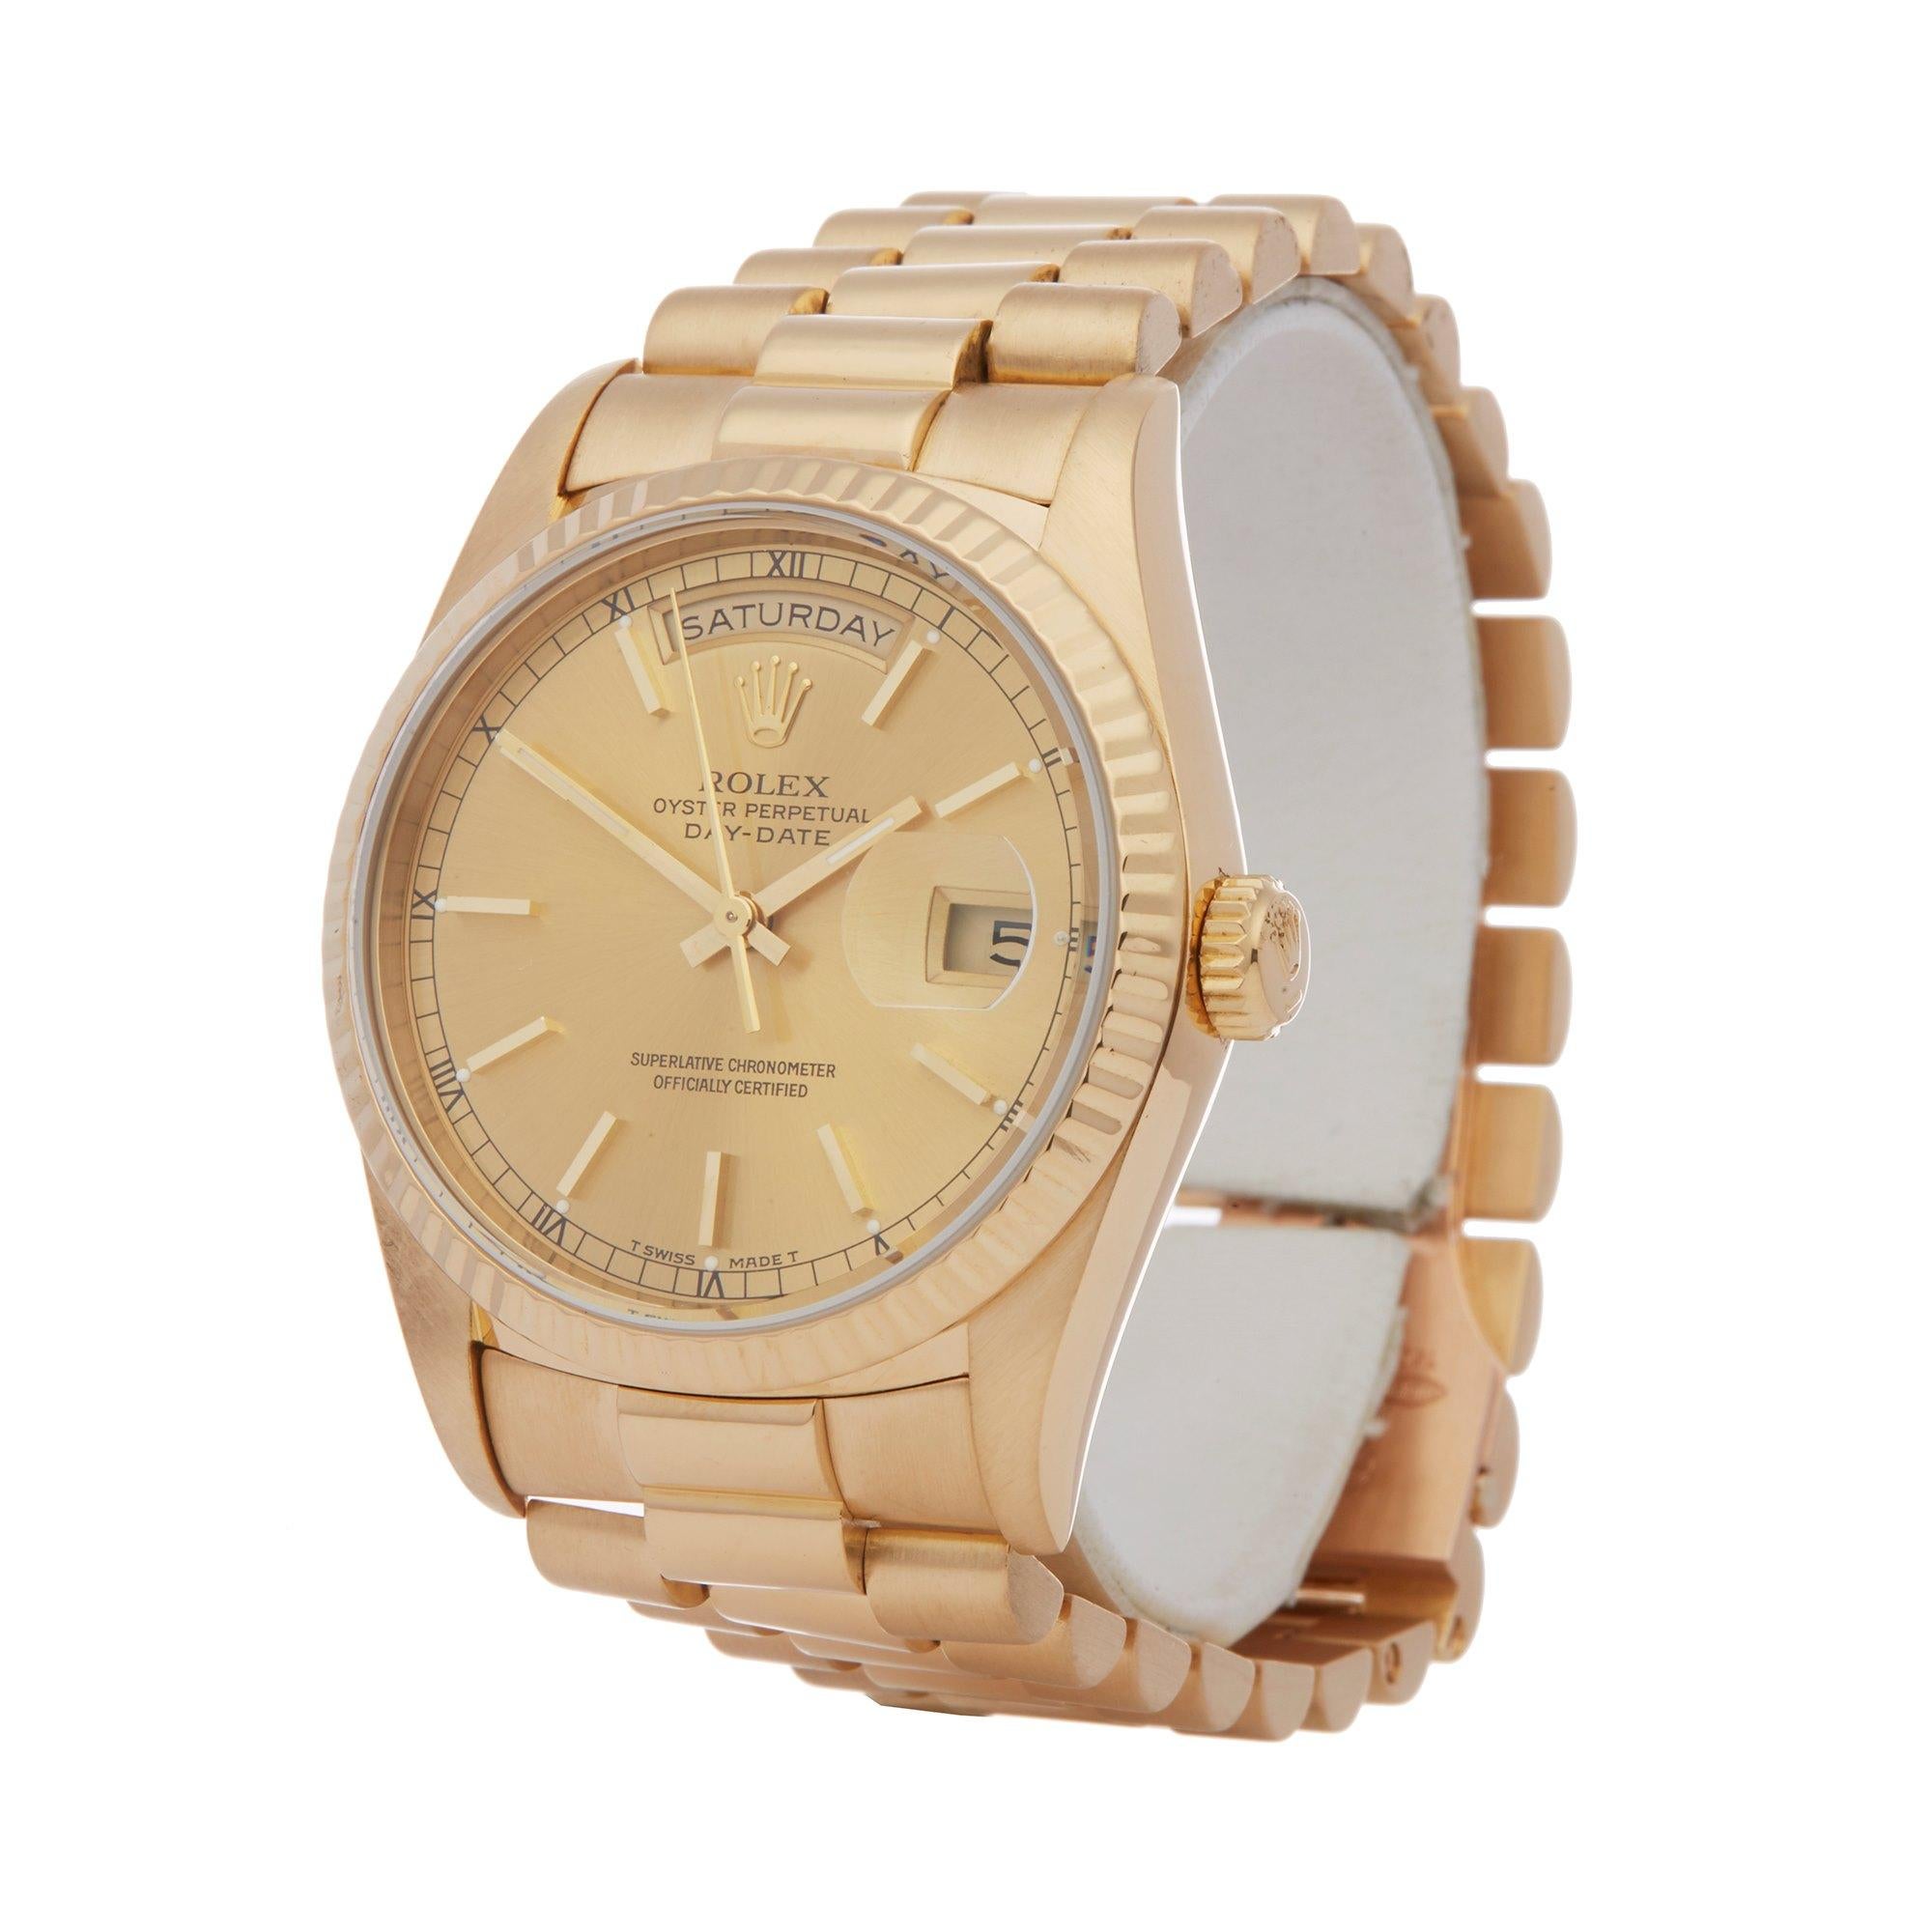 Xupes Reference: W007612
Manufacturer: Rolex
Model: Day-Date
Model Variant: 36
Model Number: 18238
Age: 1994
Gender: Unisex
Complete With: Rolex Box 
Dial: Champagne Baton
Glass: Sapphire Crystal
Case Size: 36mm
Case Material: Yellow Gold
Strap